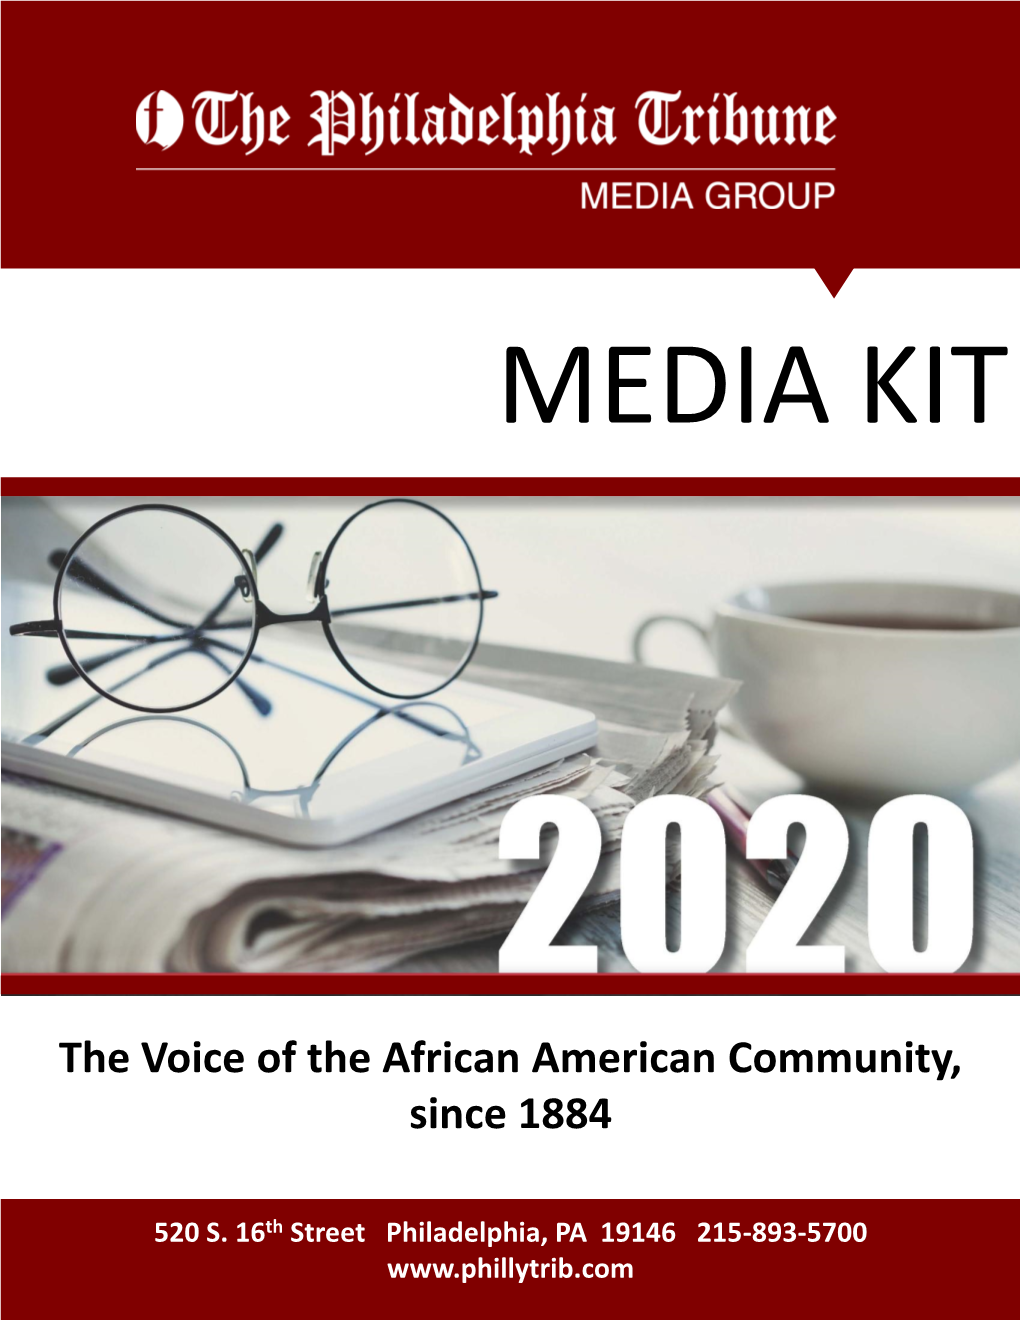 The Voice of the African American Community, Since 1884